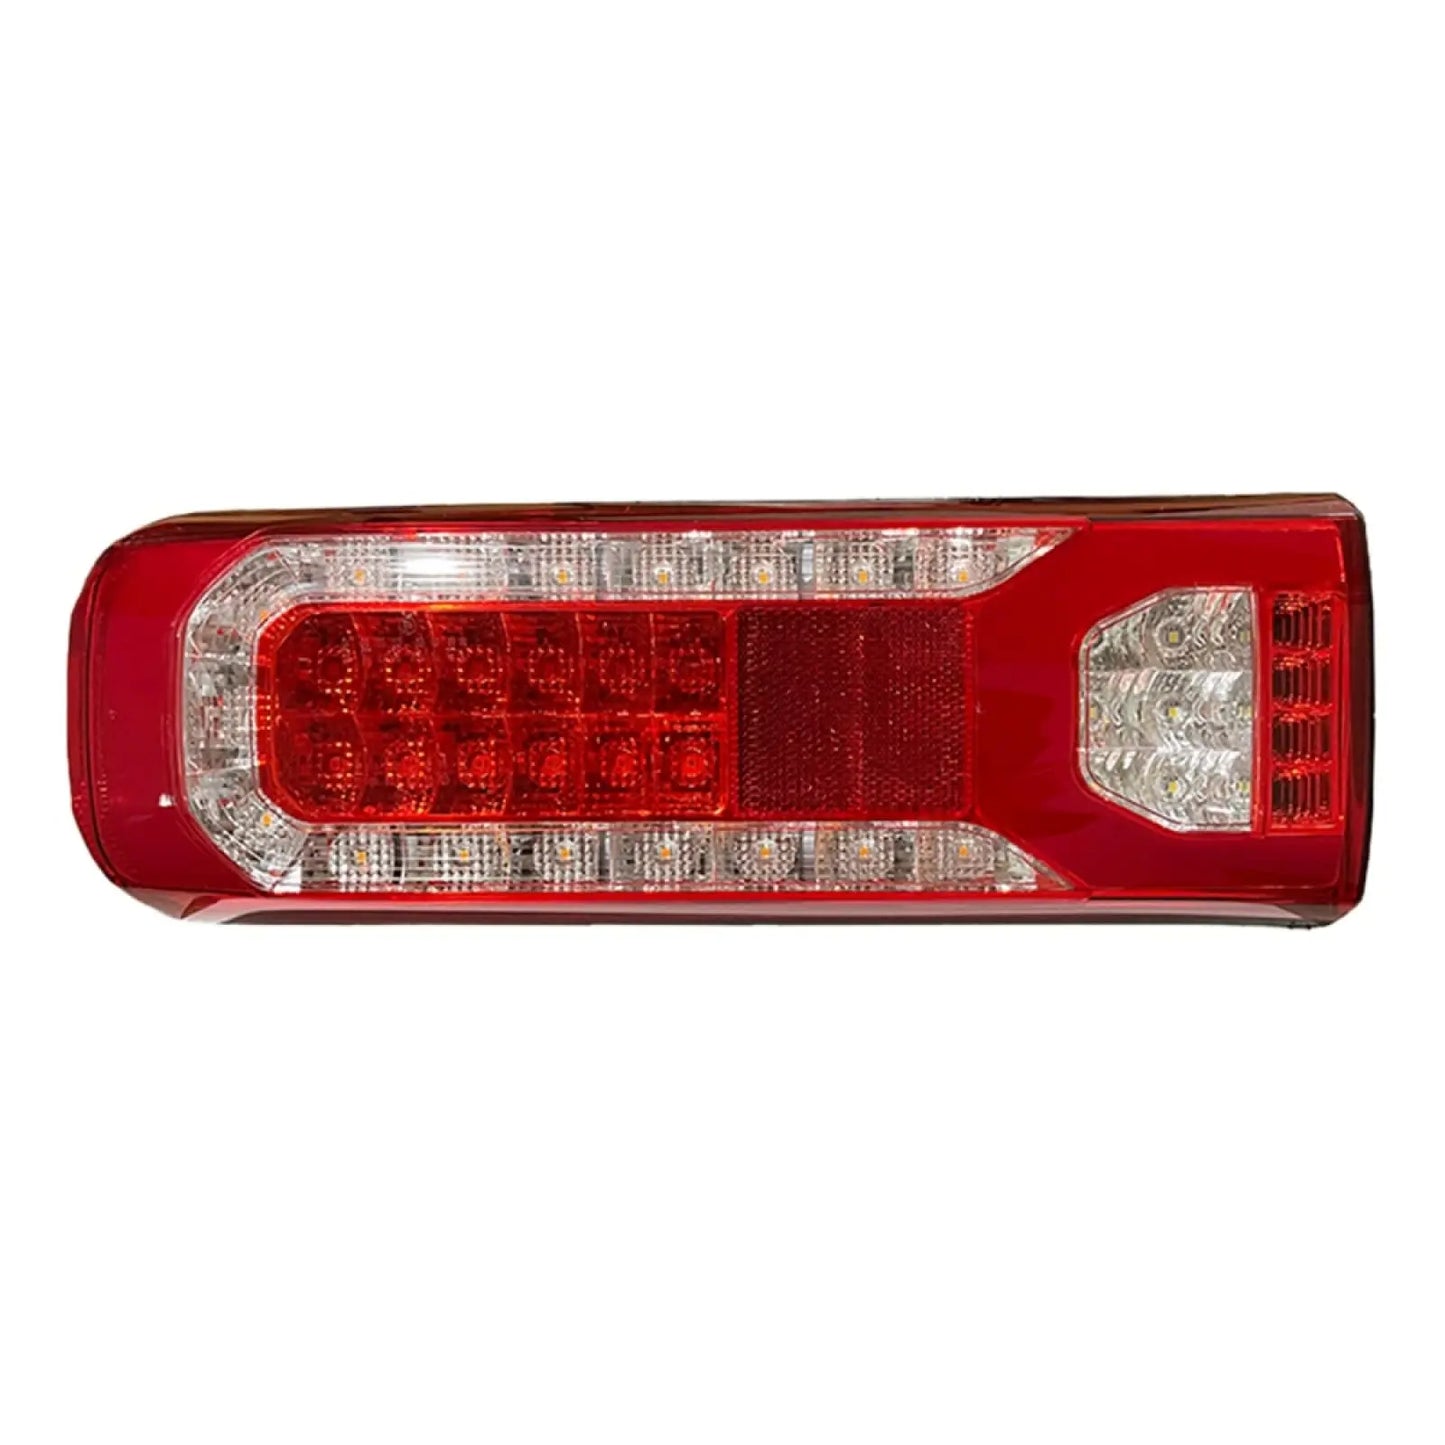 CHINA Factory Wholesale 0035443203 24V Truck Left Tail Light LED Tail Light Assembly Rear Brake Light For MERCEDES BENZ FANCHANTS China Auto Parts Wholesales